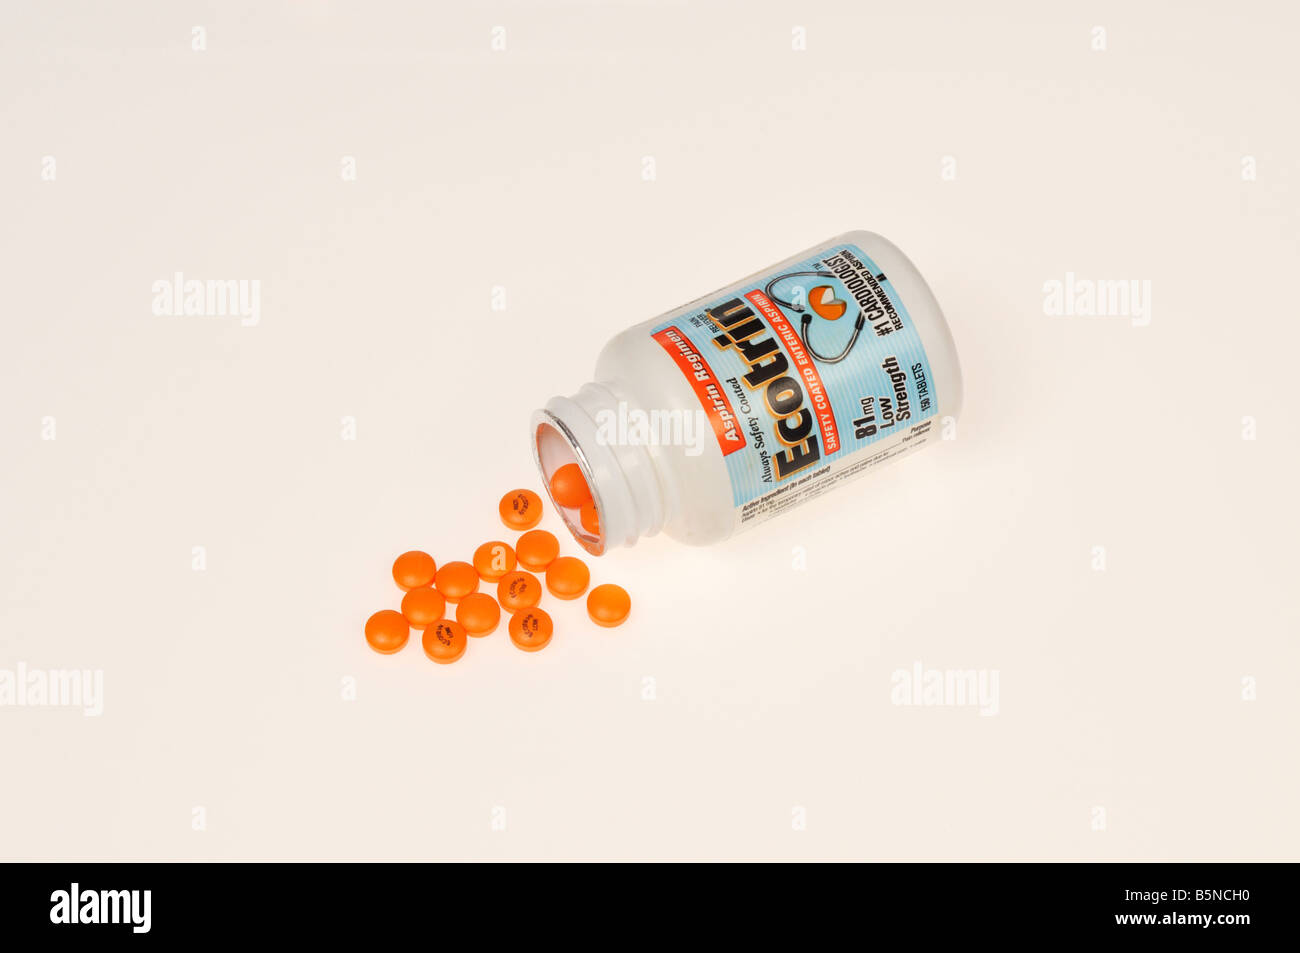 Ecotrin 81 mg low dose aspirin bottle with orange tablets on white background cutout Stock Photo